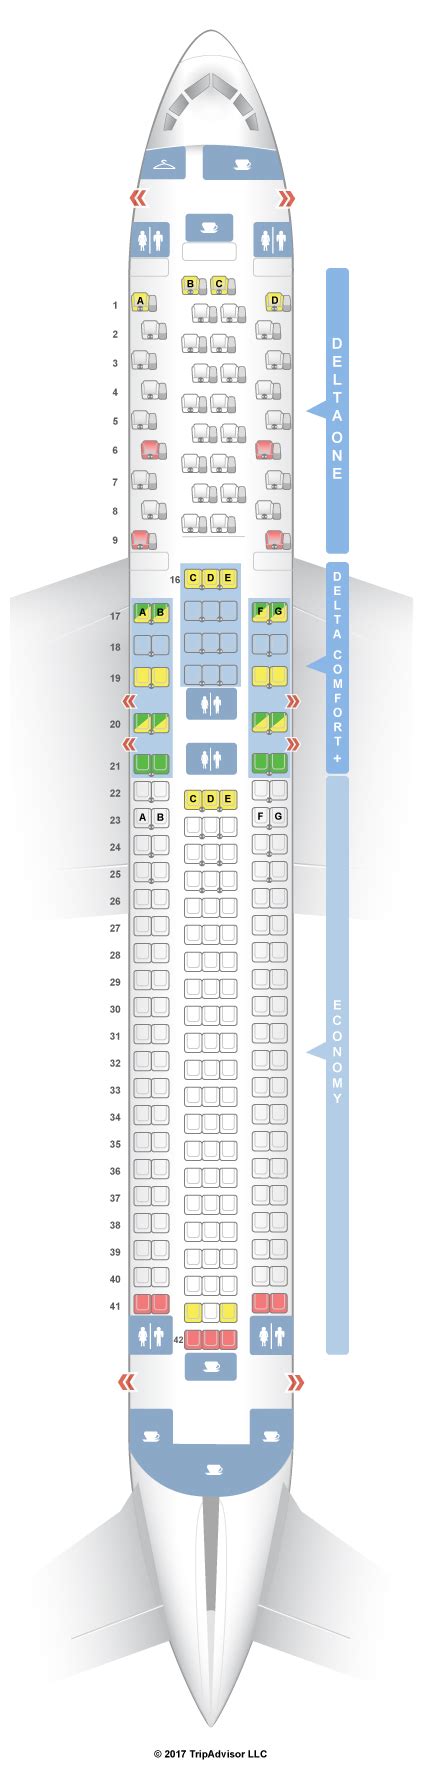 Embraer E-175 (E75) Layout 2 - SkyWest Seats: McDonnell Douglas MD-88 (M88) McDonnell Douglas MD-90 (M90) Bombardier CRJ-100/200. Bombardier CRJ-700 (CR7) Bombardier CRJ-900 (CR9) Find your aircraft by flight number or route. Your all-inclusive guide to Delta providing the most comprehensive resource on current aircraft, contact …. 